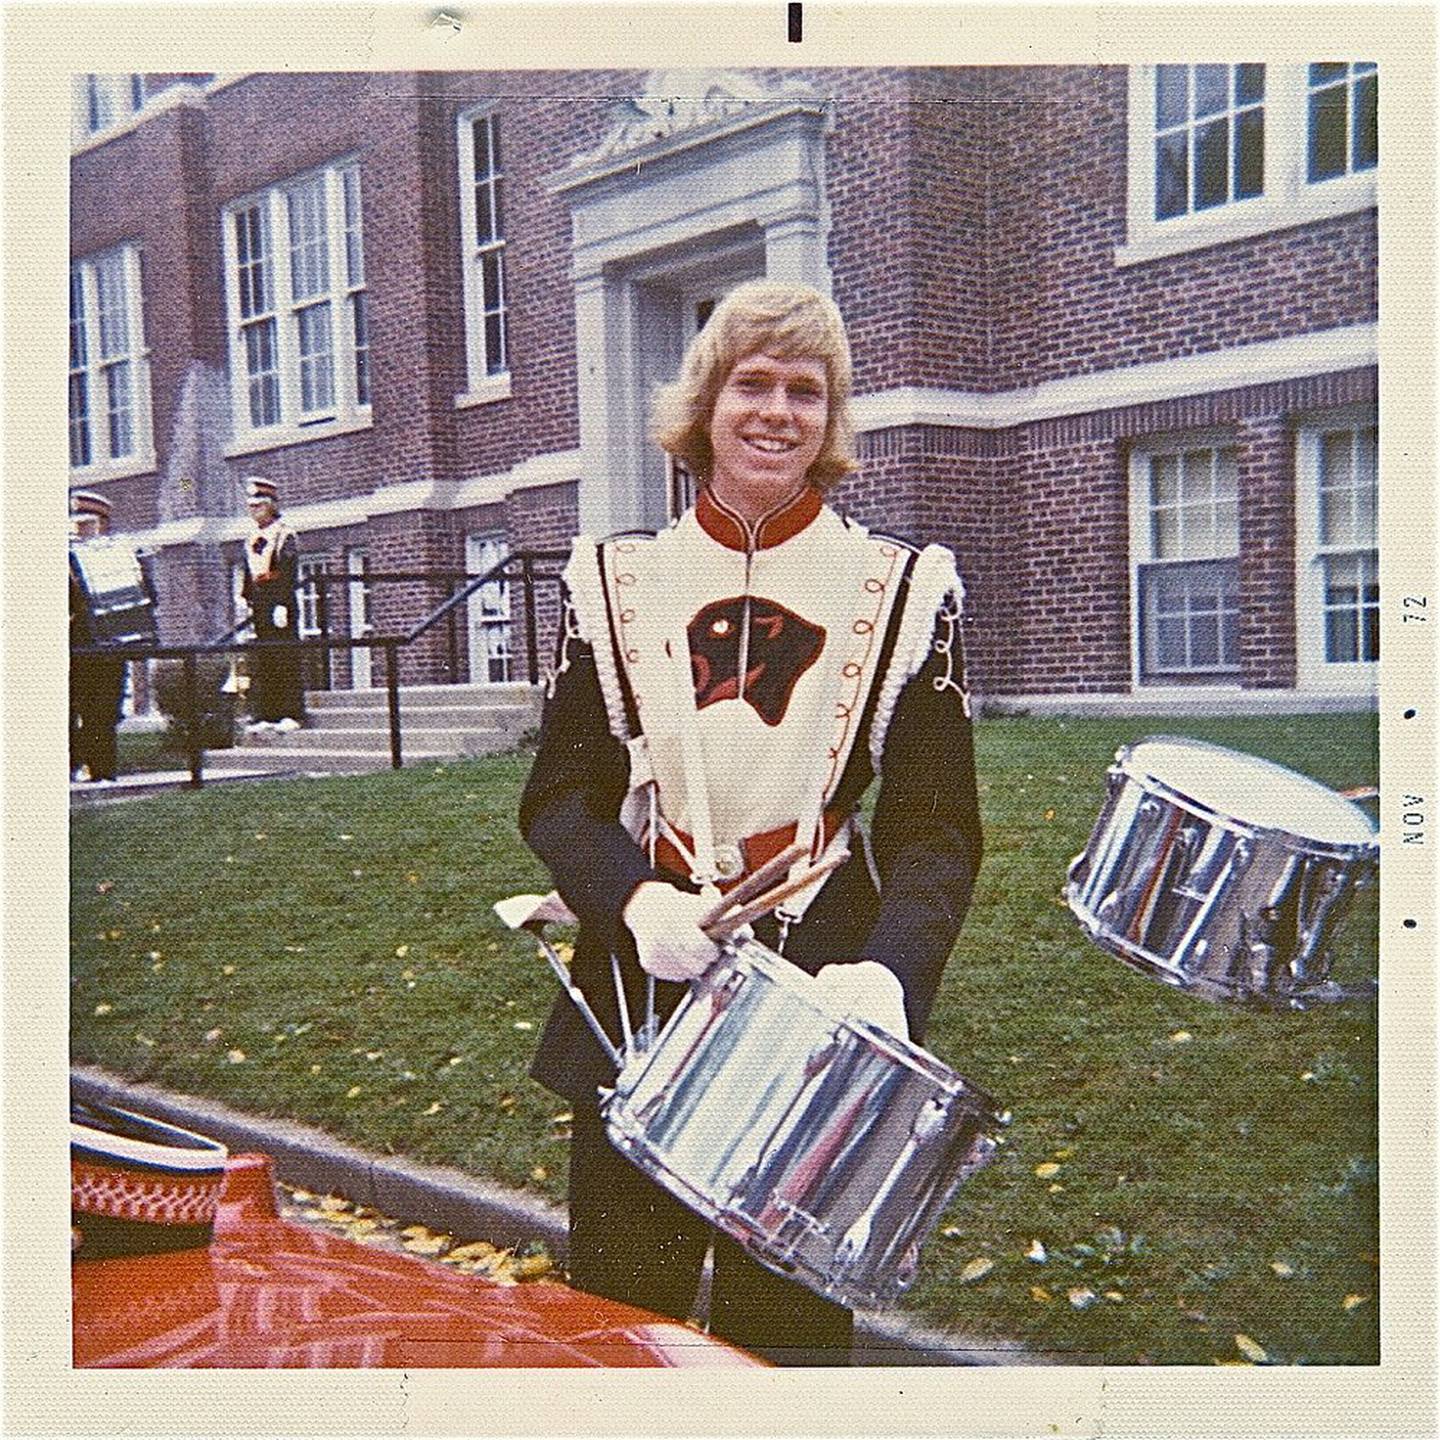 Robinson in 1972 during his time in the Creston High School marching band.